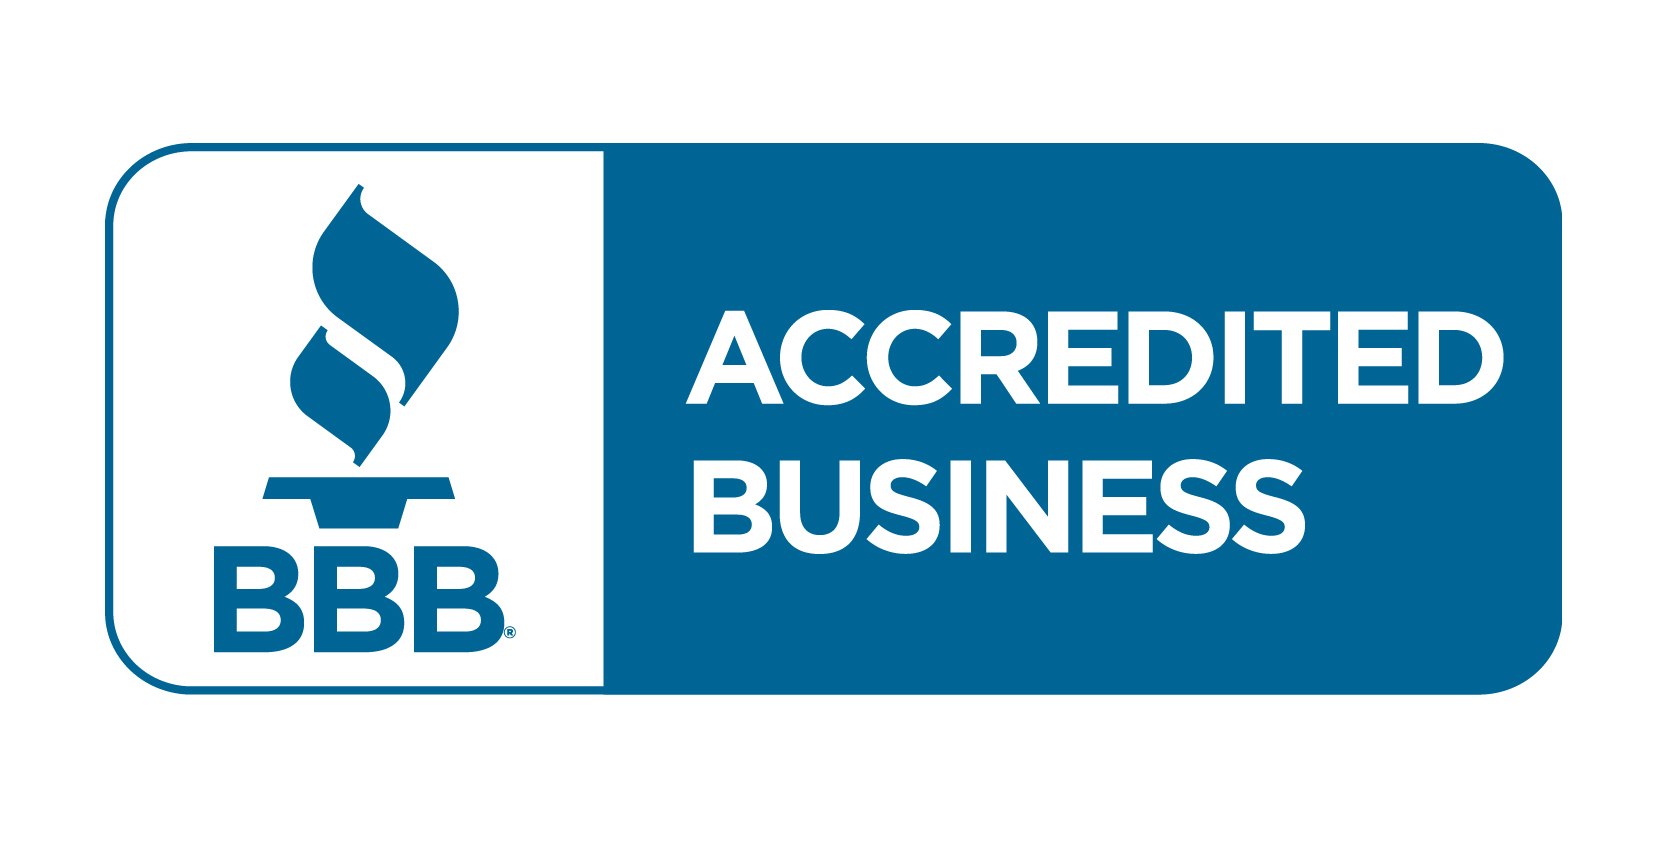 BBB Accredited Business | Right Carpet & Interiors